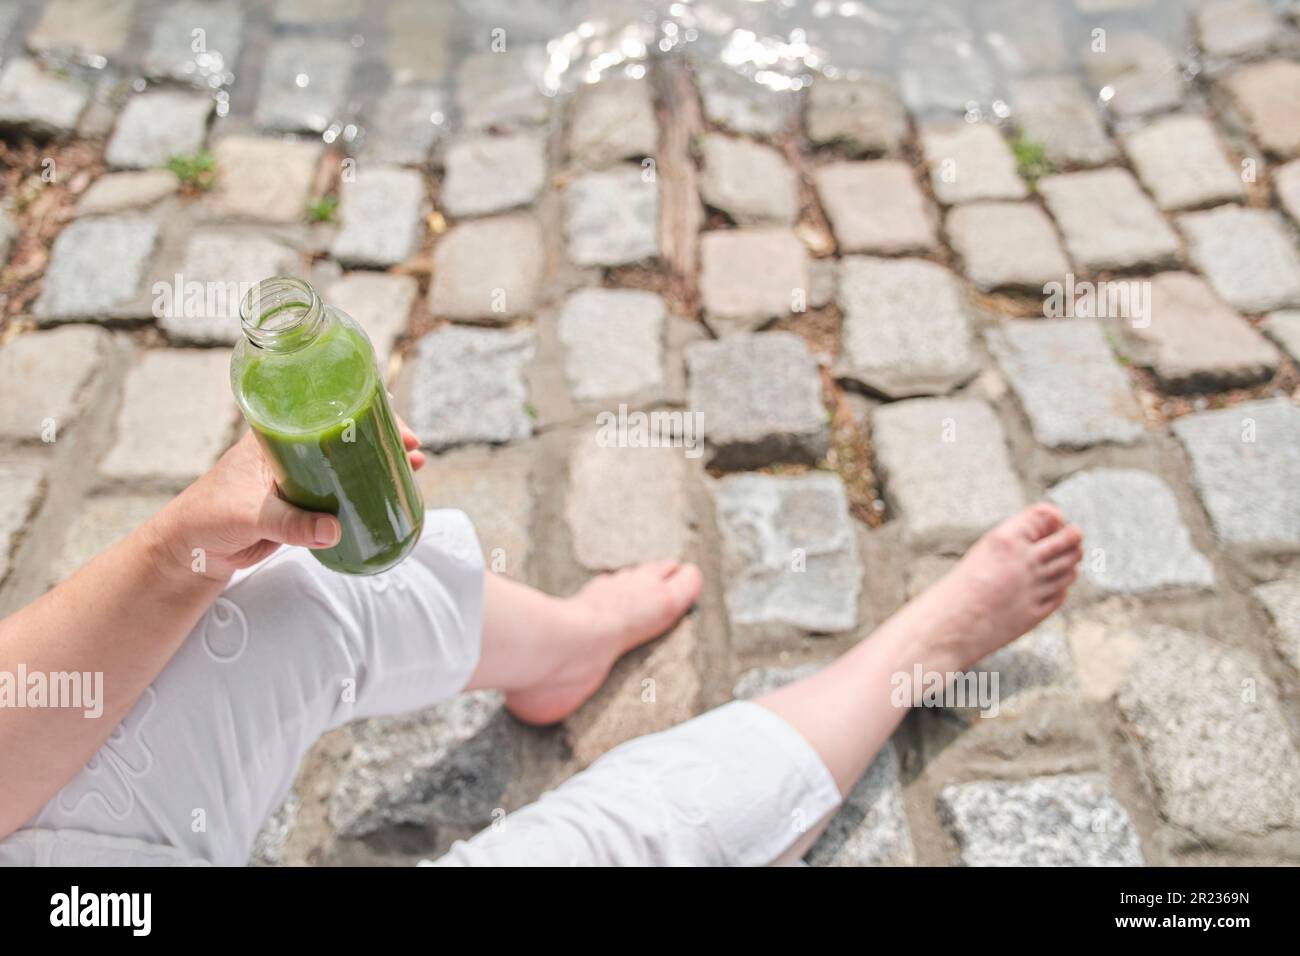 Unknown person holding a bottle of green juice outdoors. Concepts: wellness, nourishment, healthy and sustainable lifestyle. Stock Photo